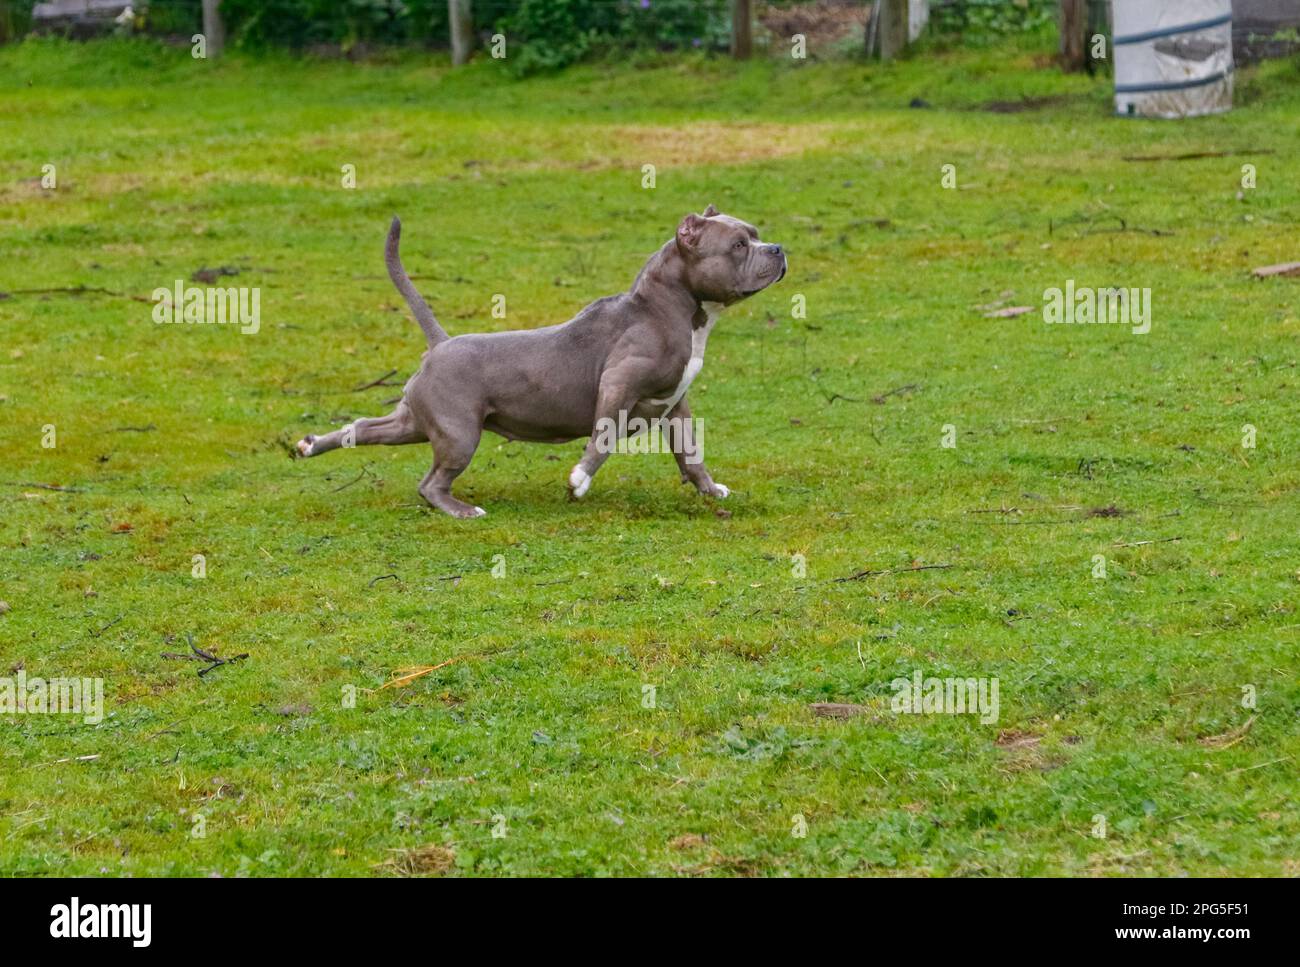 Grey pitbull stretching on the grass while playing Stock Photo